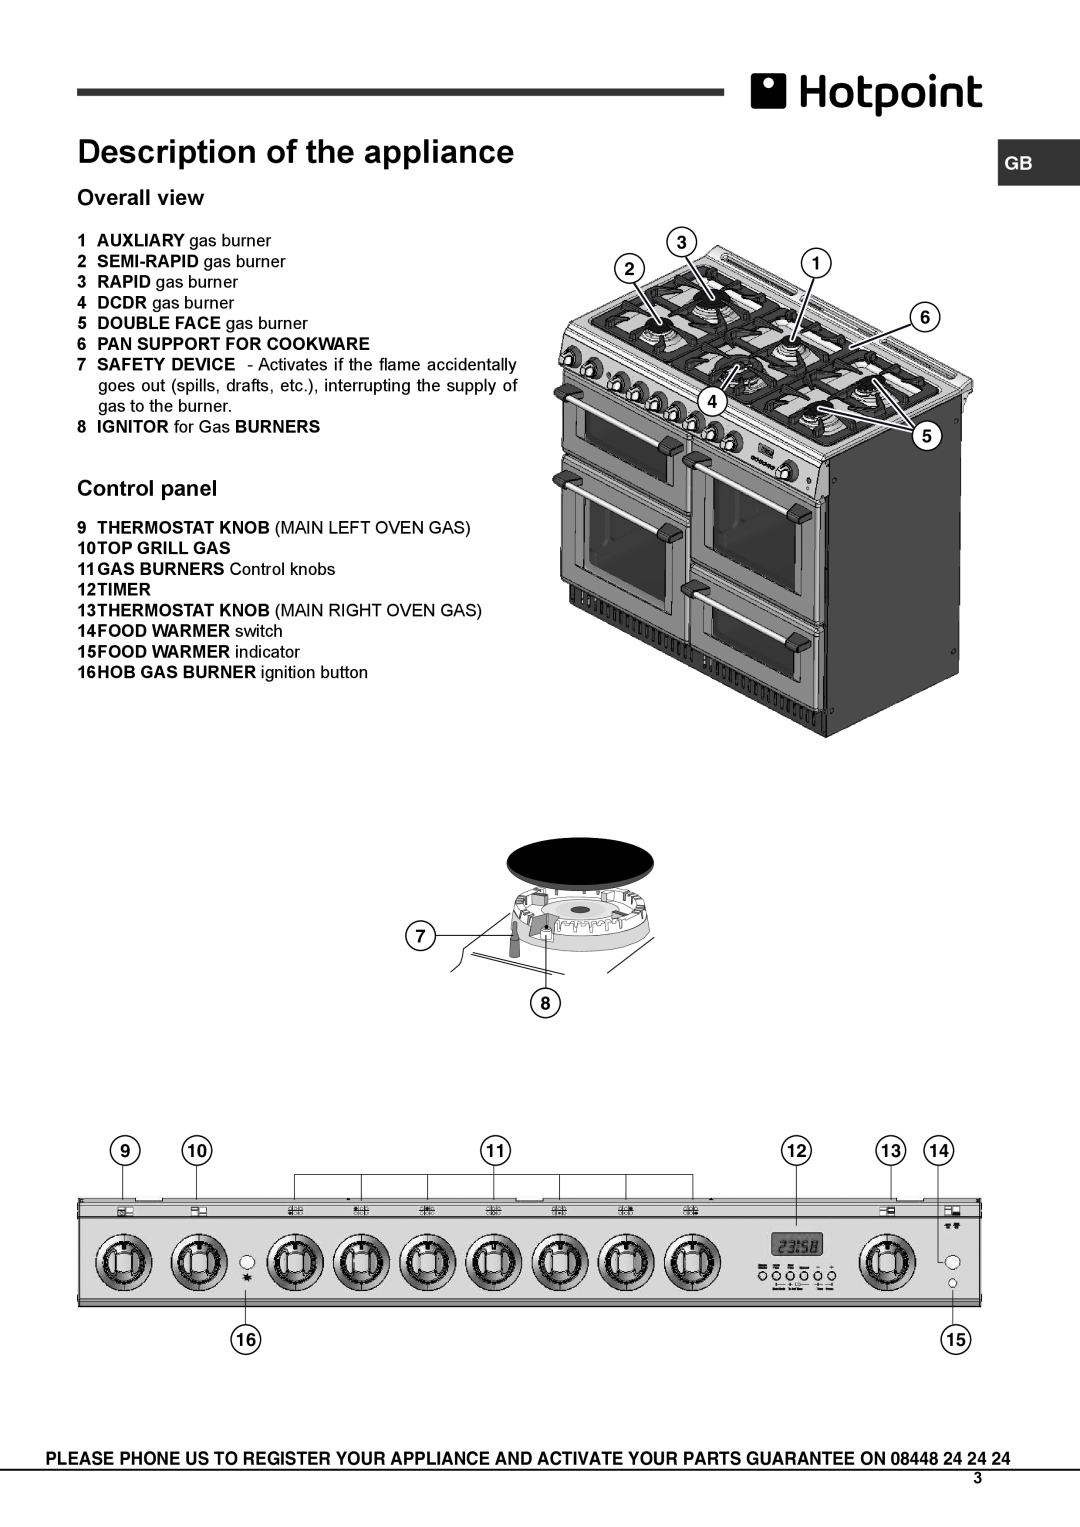 Hotpoint CH 10756 GF S, CH 10755 GF S, CH 10750 GF S Description of the appliance, Overall view, Control panel 